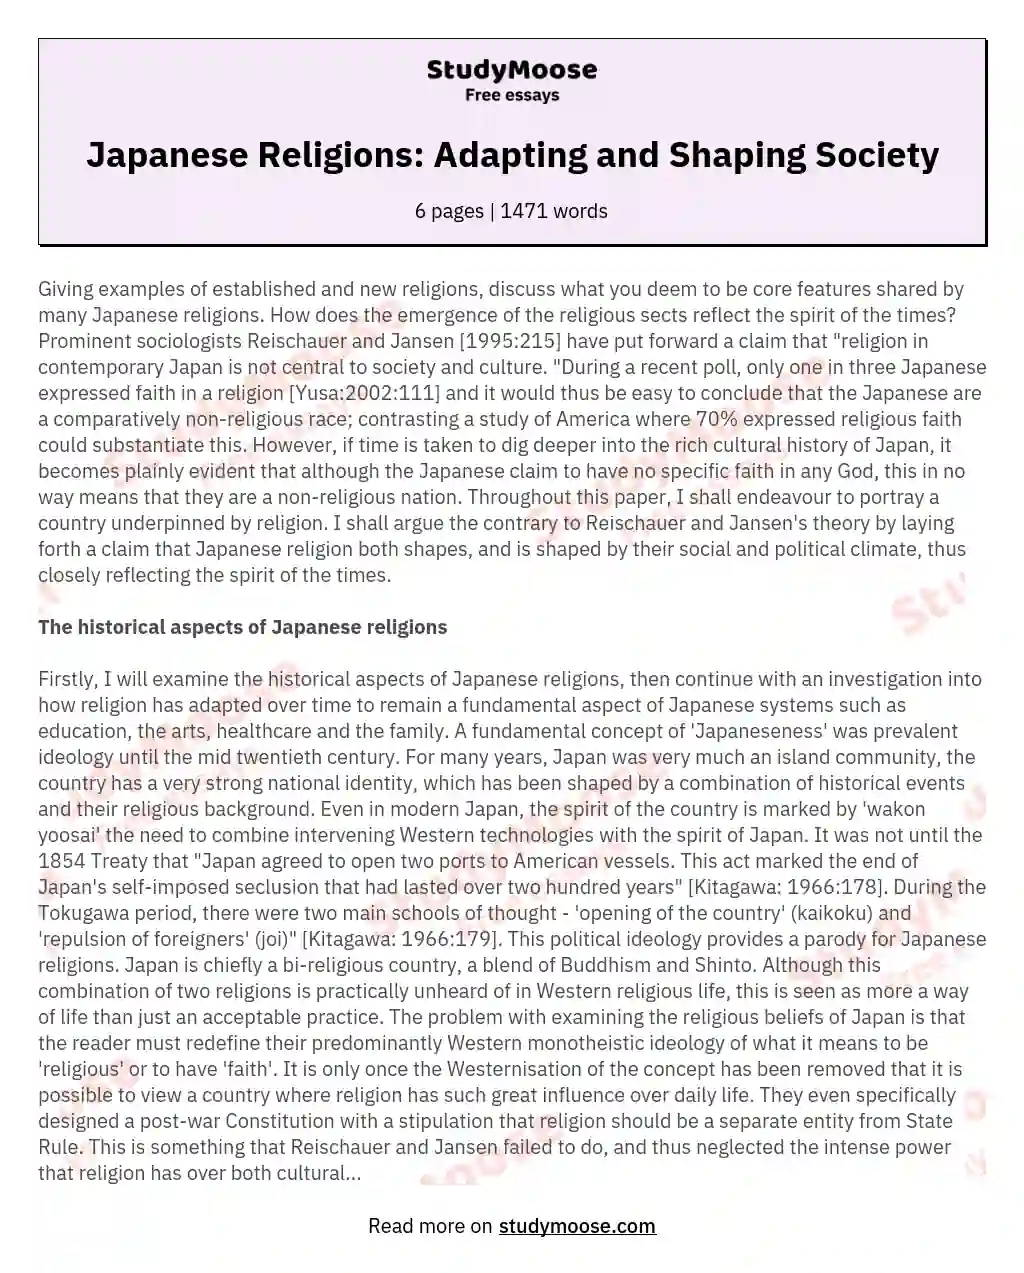 Japanese Religions: Adapting and Shaping Society essay